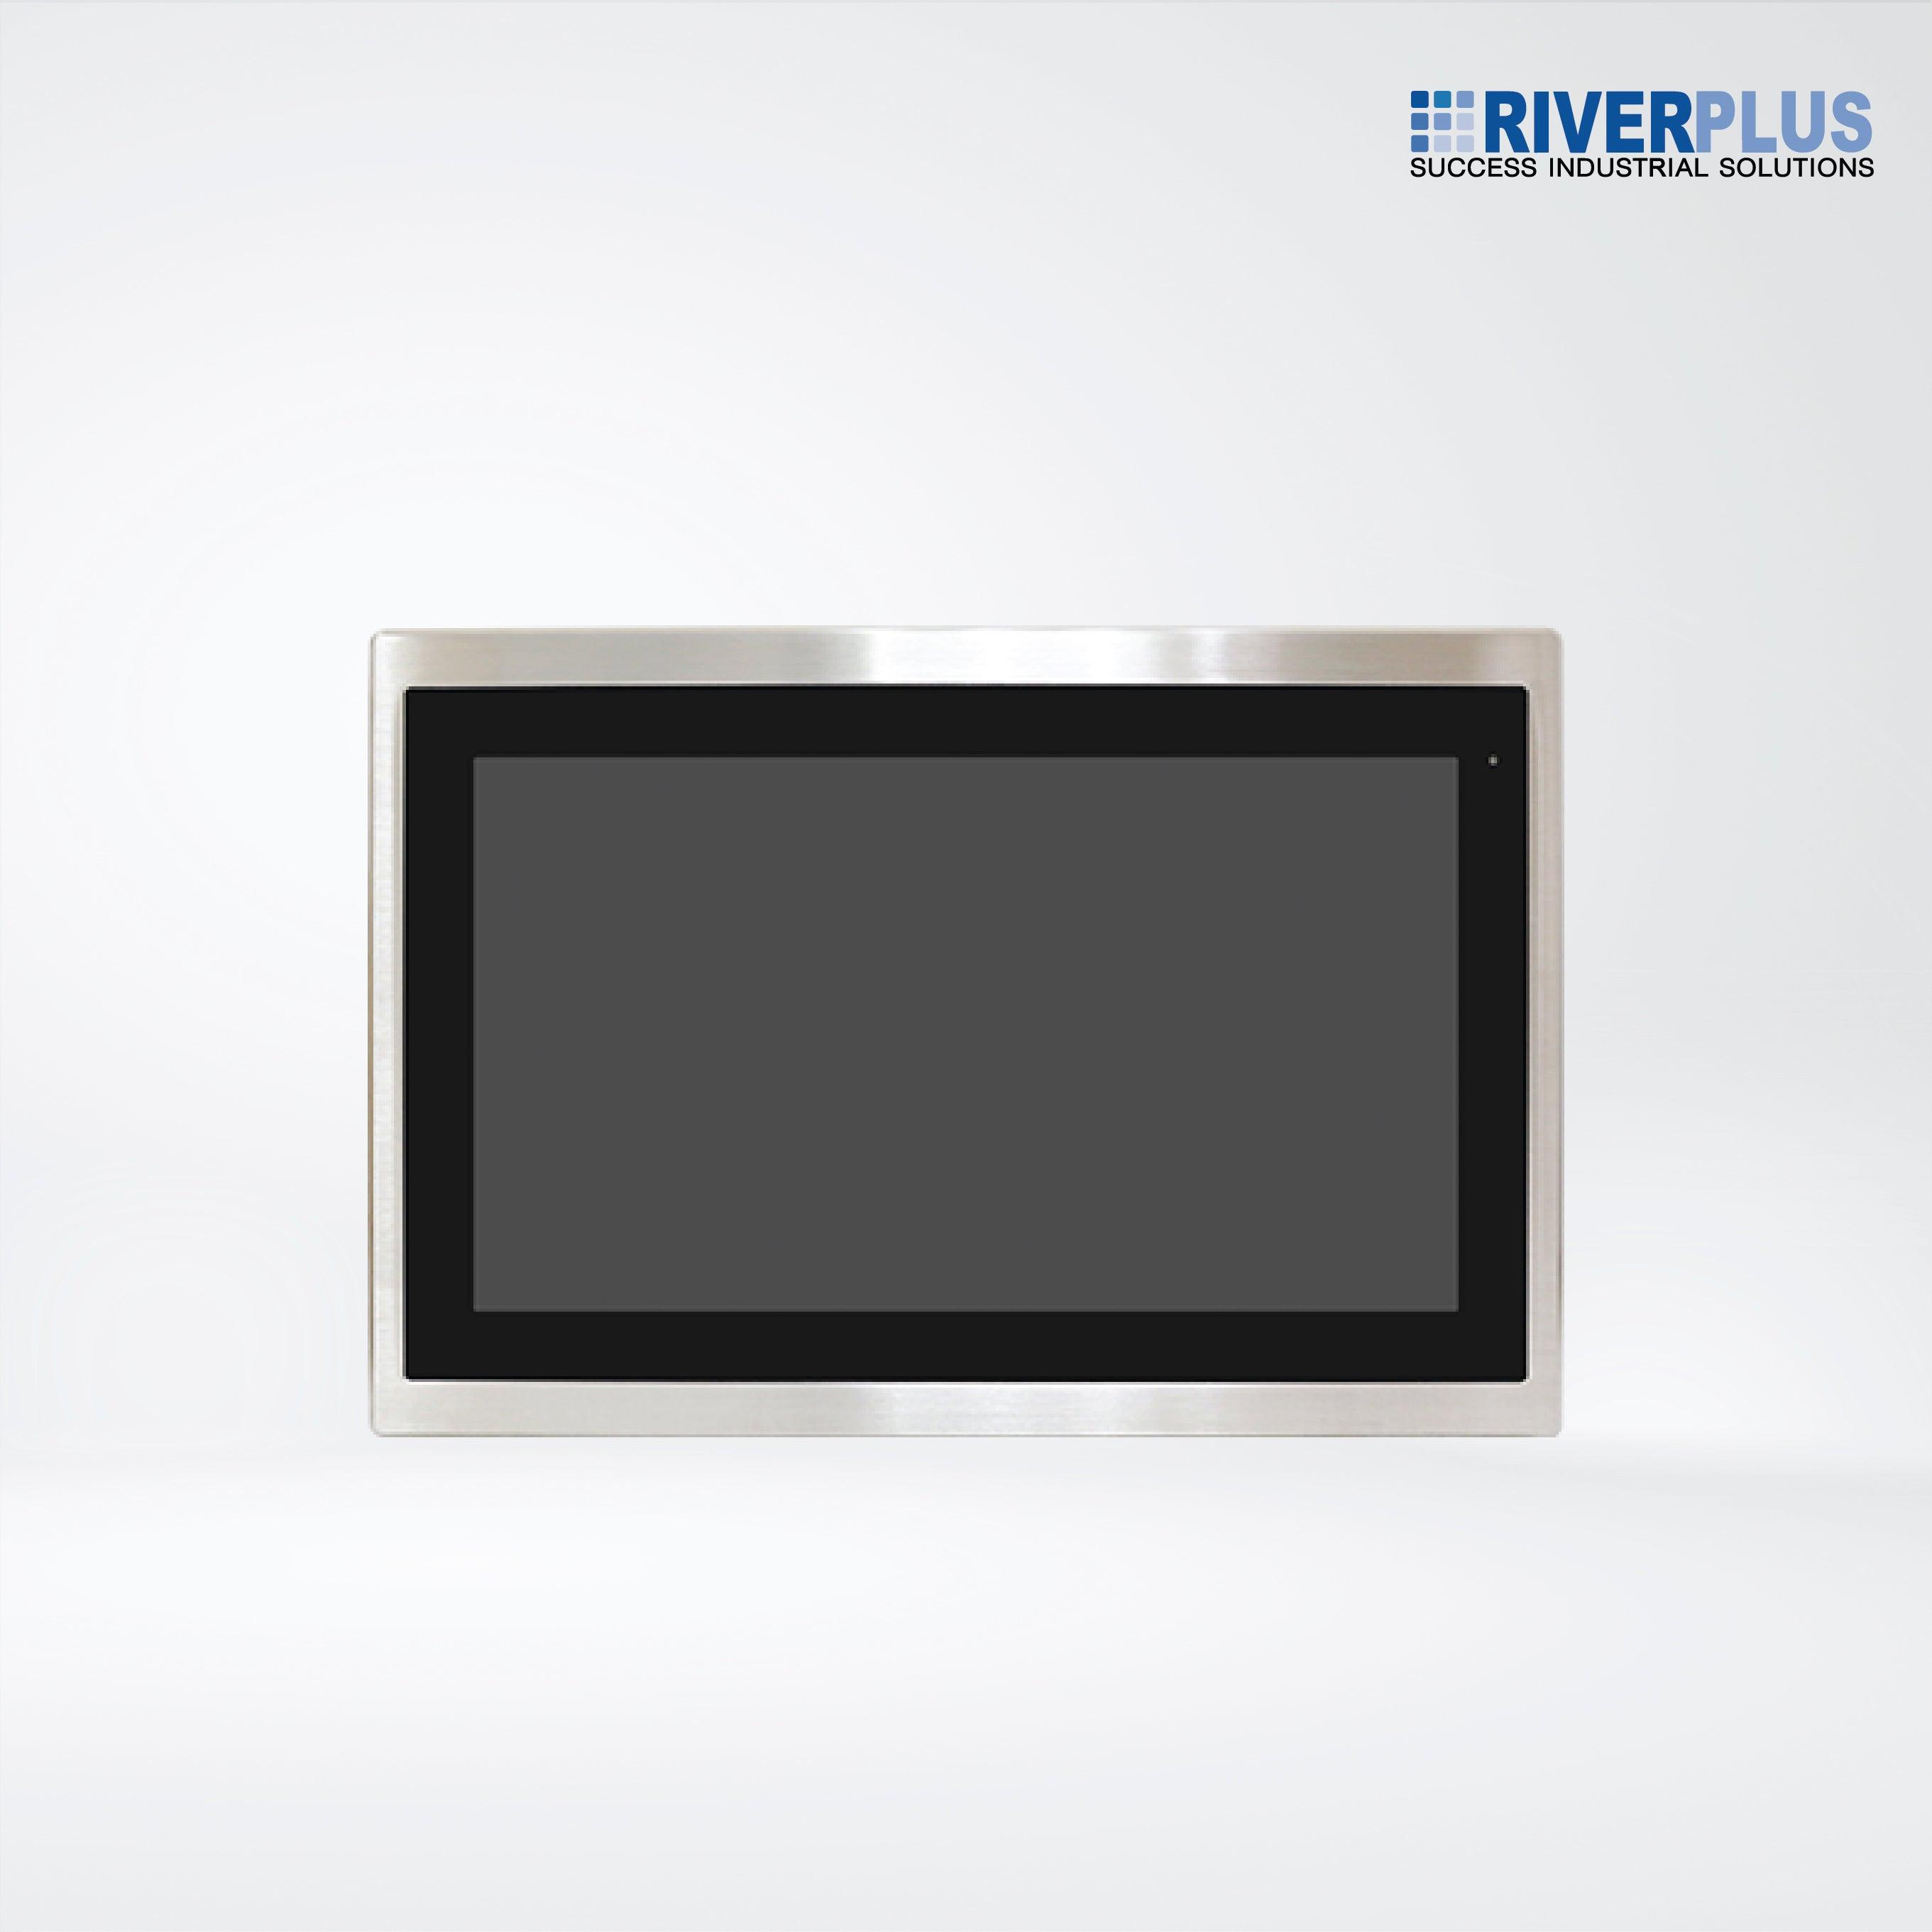 FABS-116P 15.6” Flat Front Panel IP66 Stainless Chassis Display - Riverplus